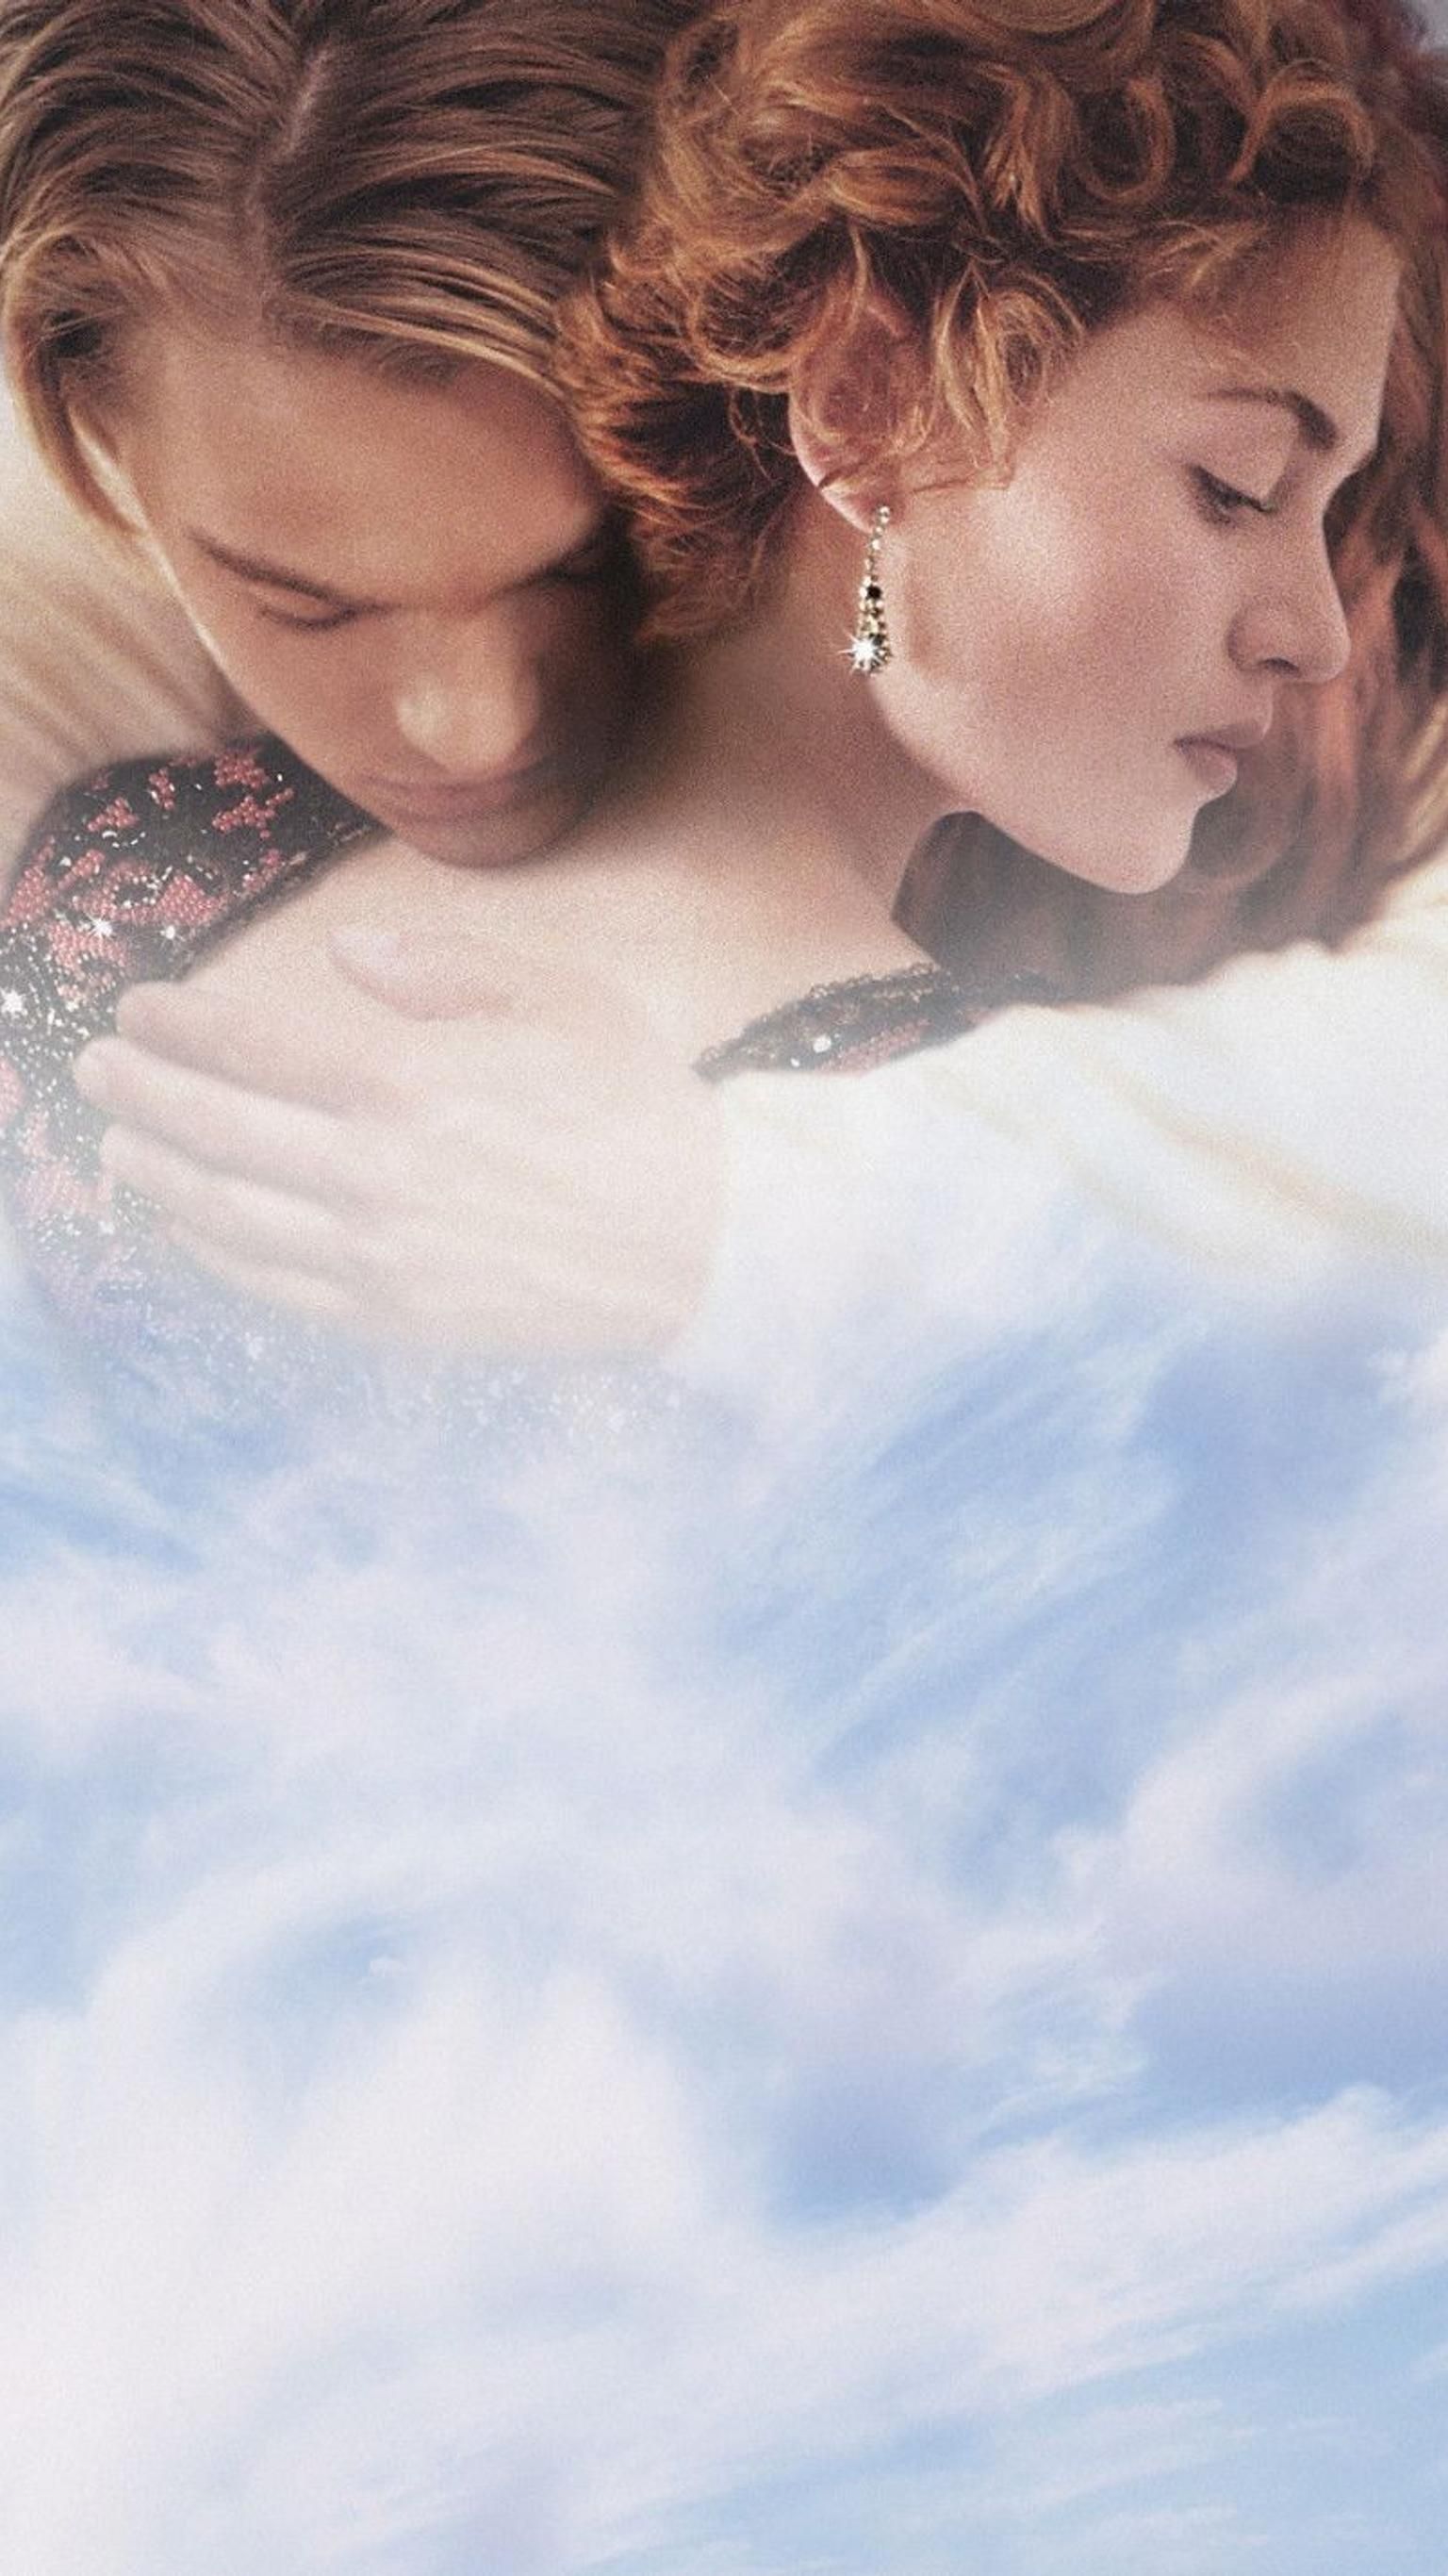 Titanic Phone Wallpaper - Celine Dion My Heart Will Go On Love Theme From Titanic , HD Wallpaper & Backgrounds